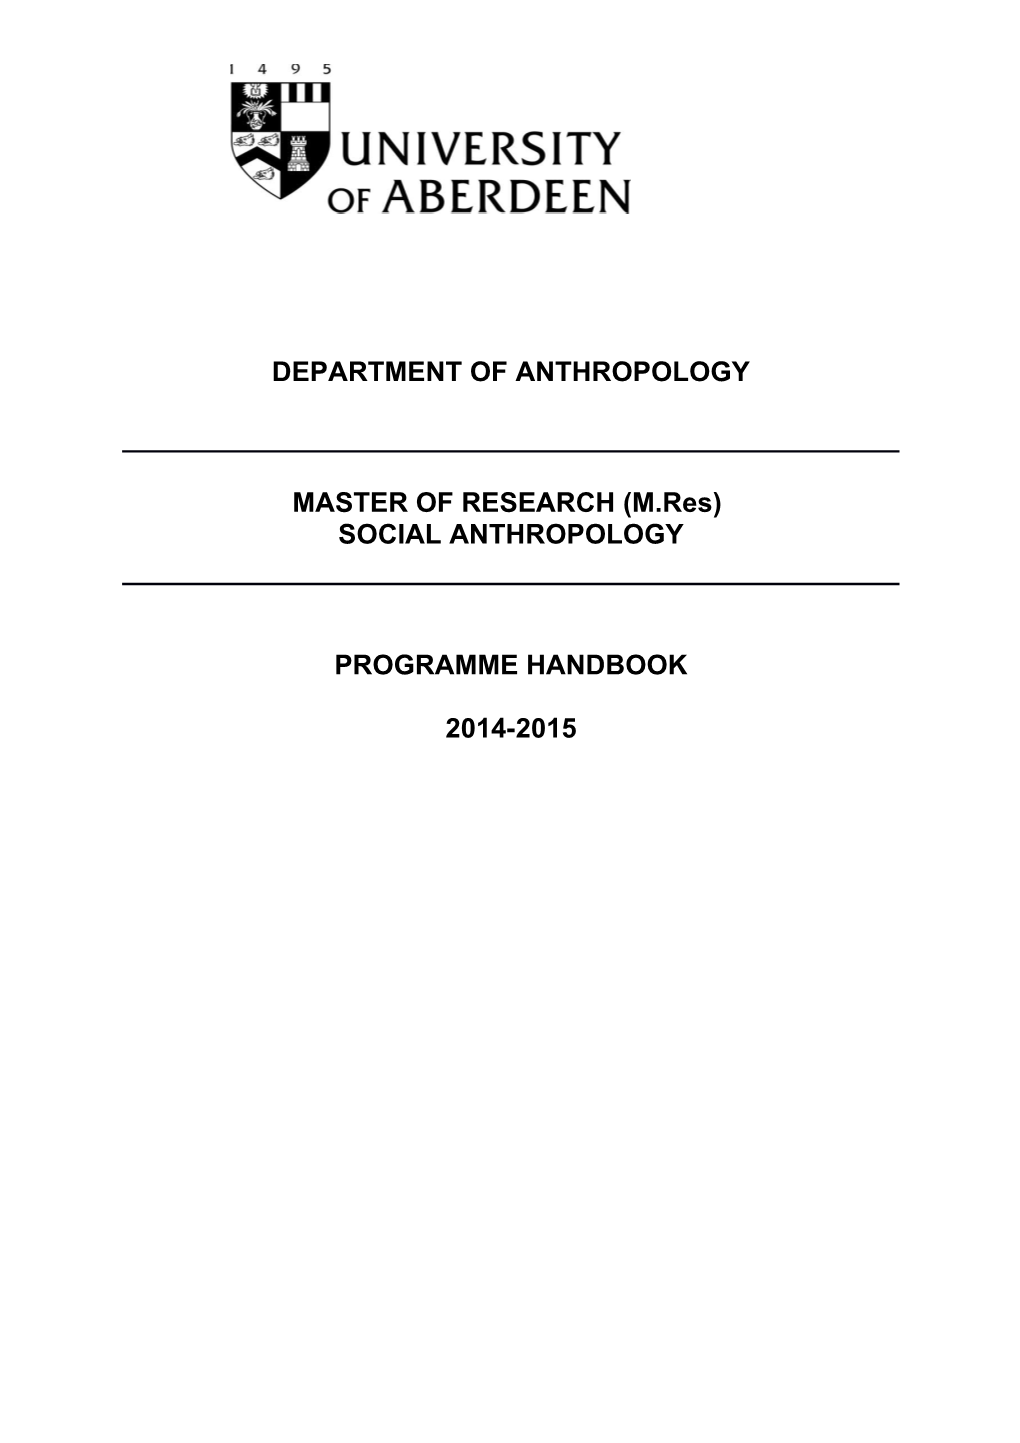 Research and Graduate Programme in Social Anthropology, Ethnology and Cultural History